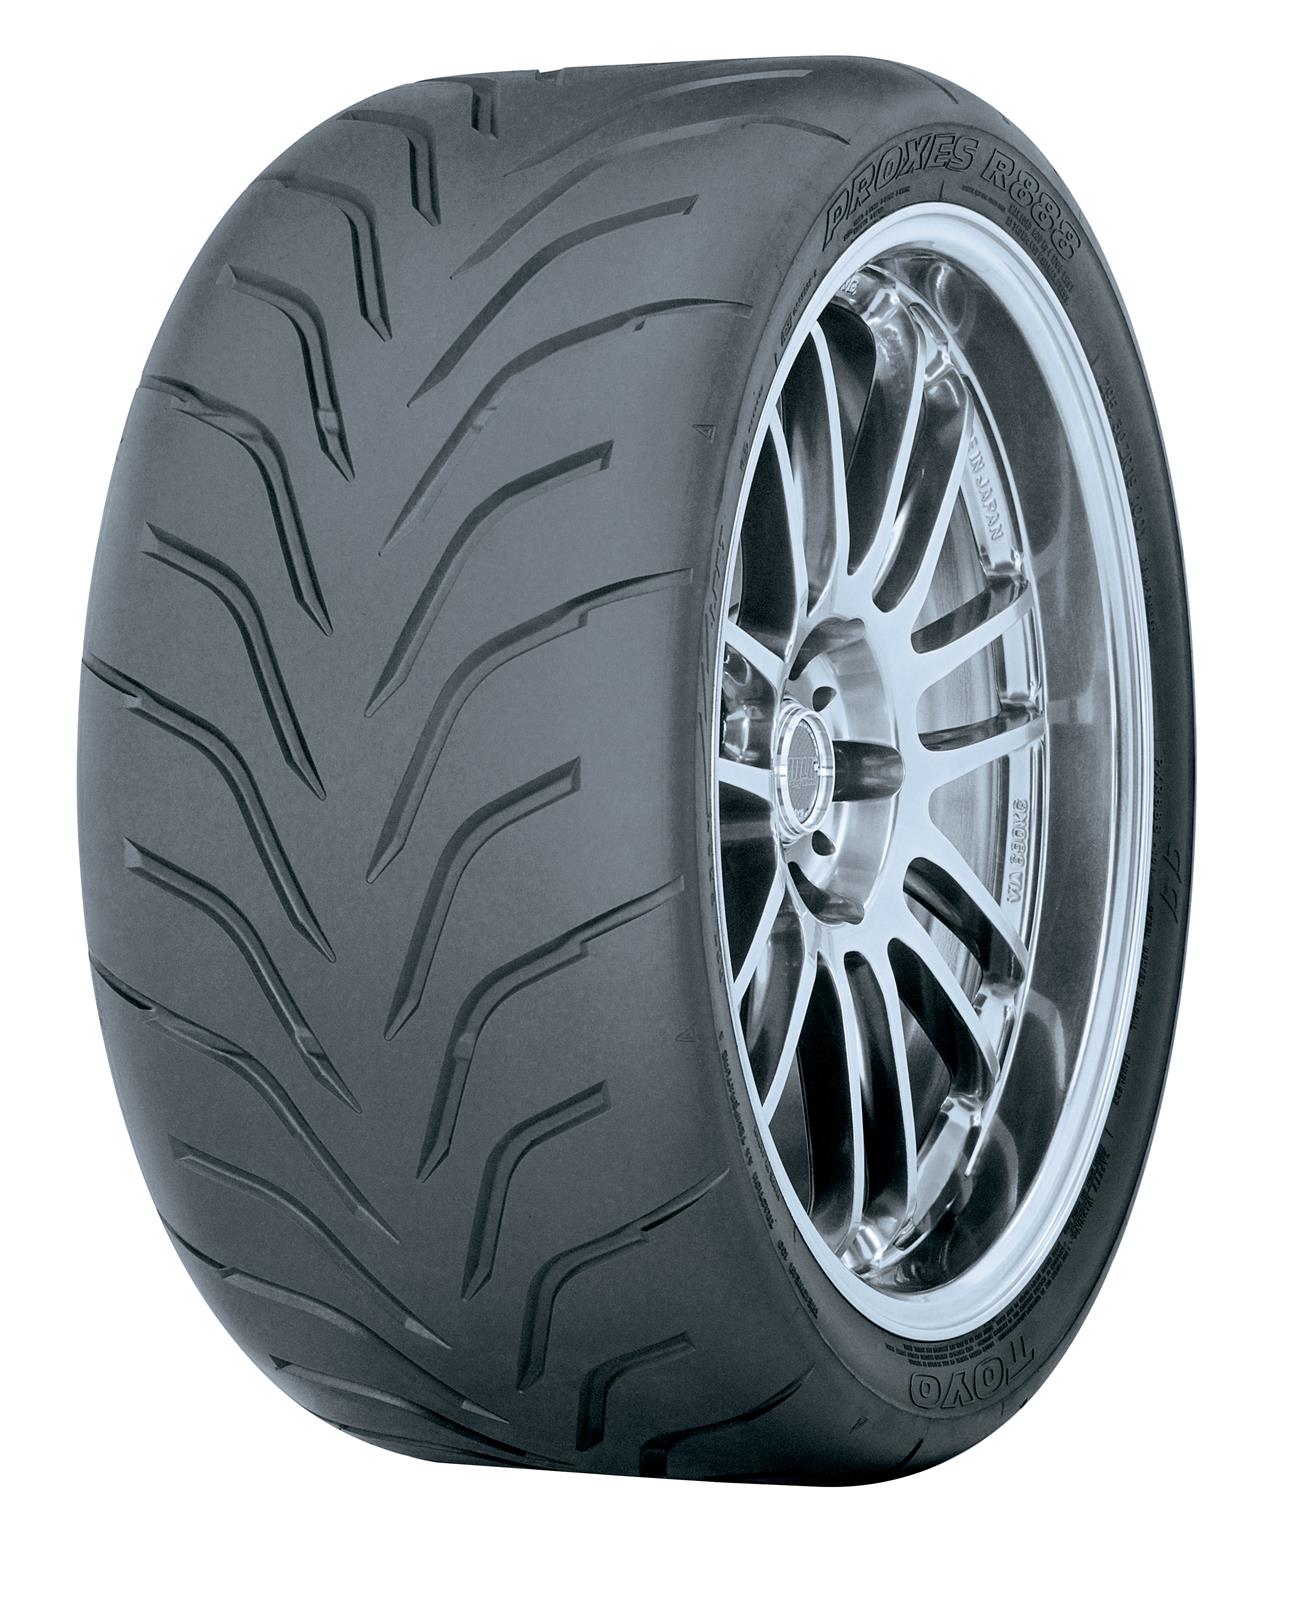 Toyo Tires 168250 Toyo Proxes R888 Tires | Summit Racing